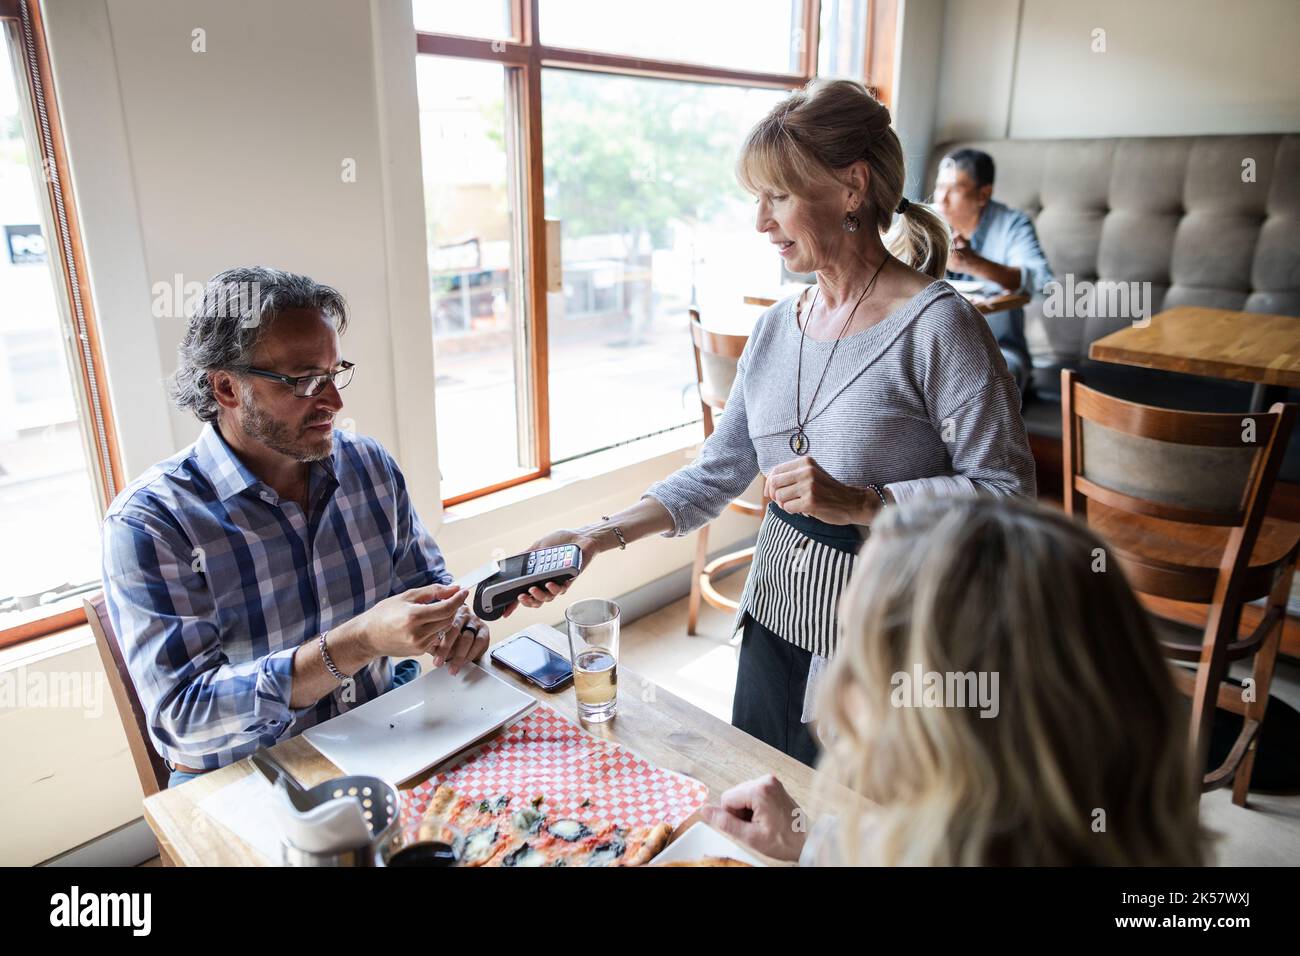 Customer paying waitress with smart card in restaurant Stock Photo